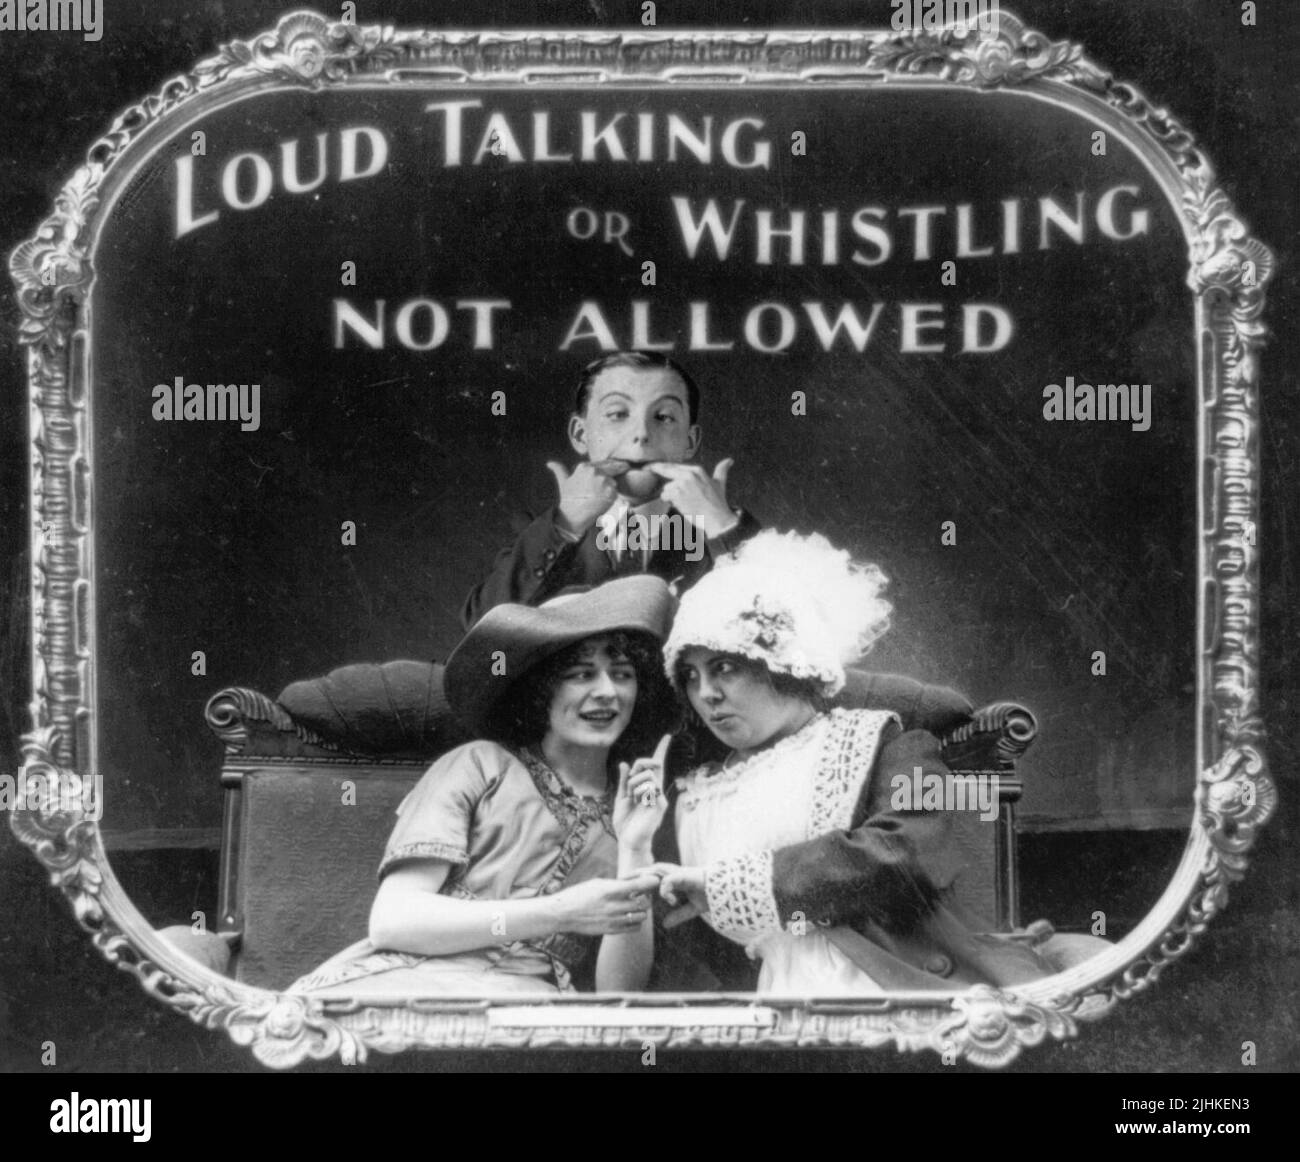 Loud talking or whistling not allowed. Positive paper print from lantern slide used in motion picture theaters as announcement. Stock Photo